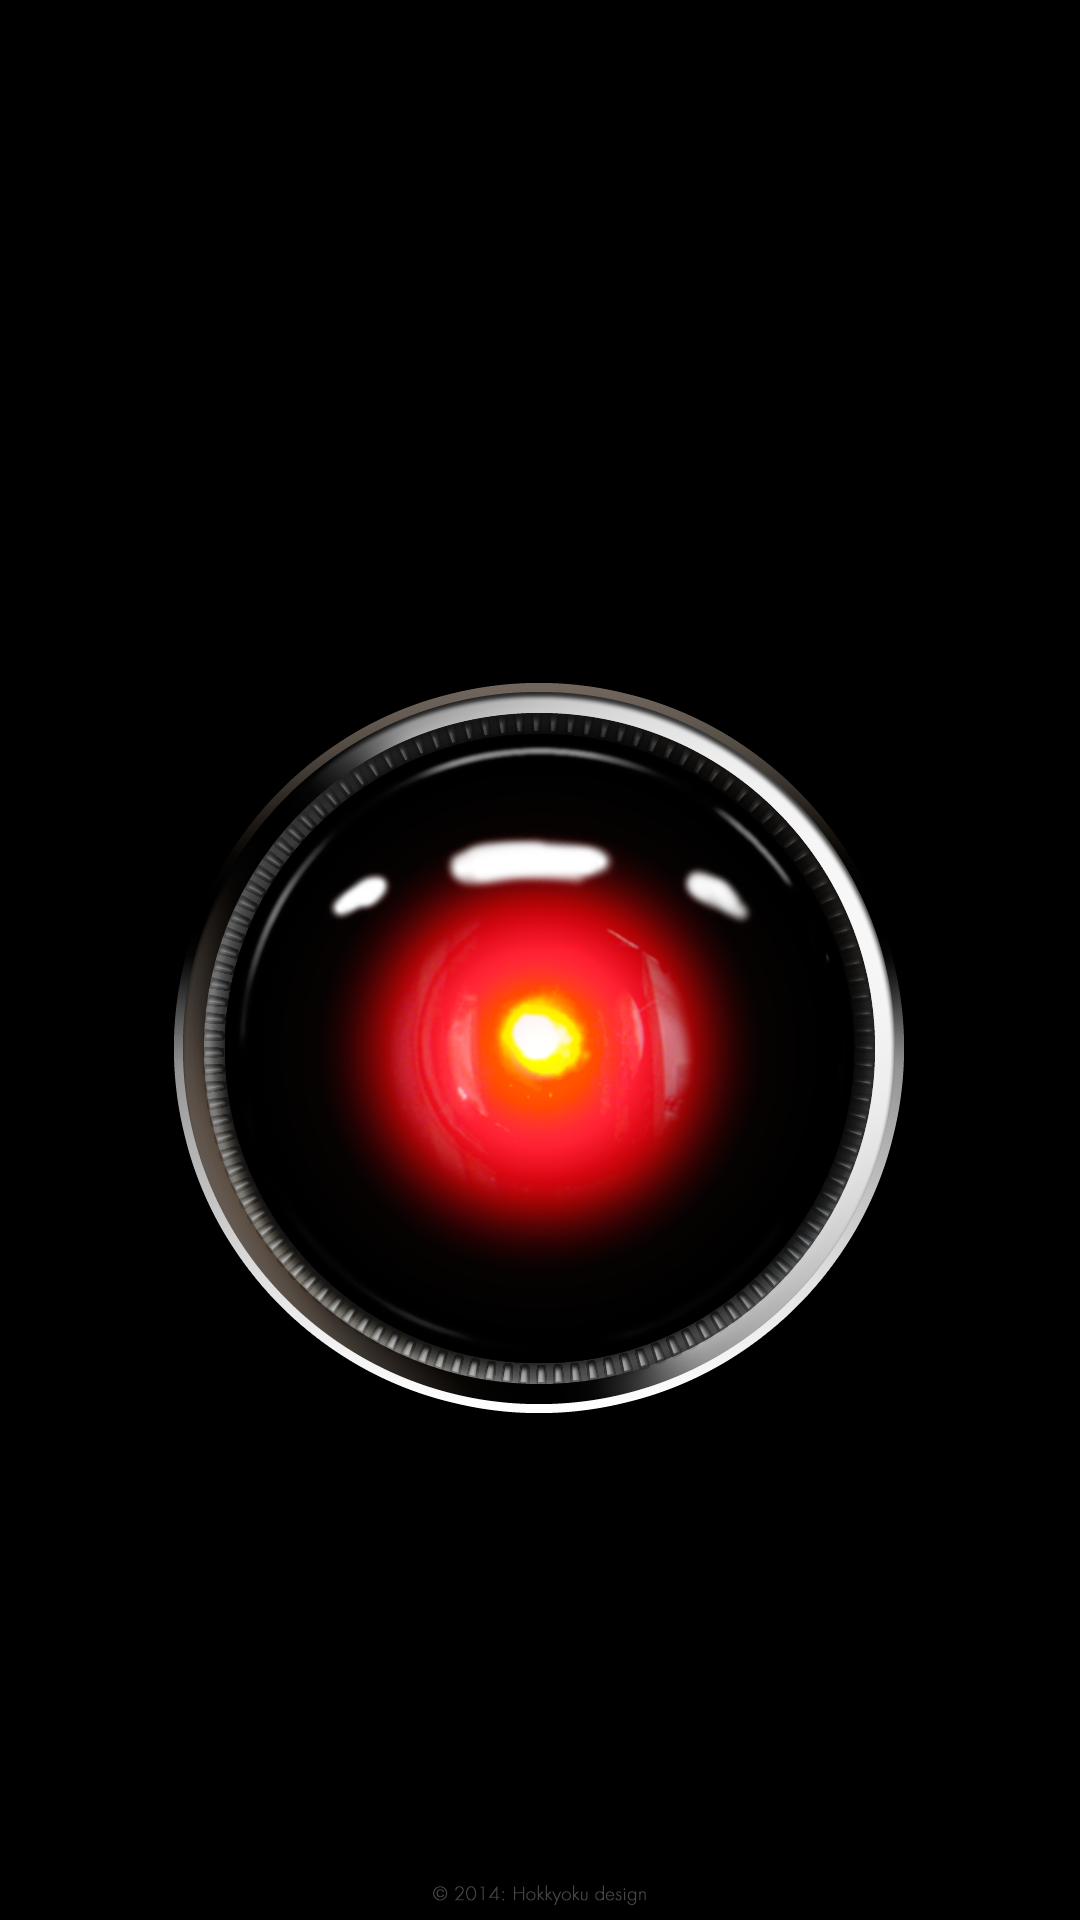 Hal 9000 Wallpaper Android / Set hal's famous camera eye as live